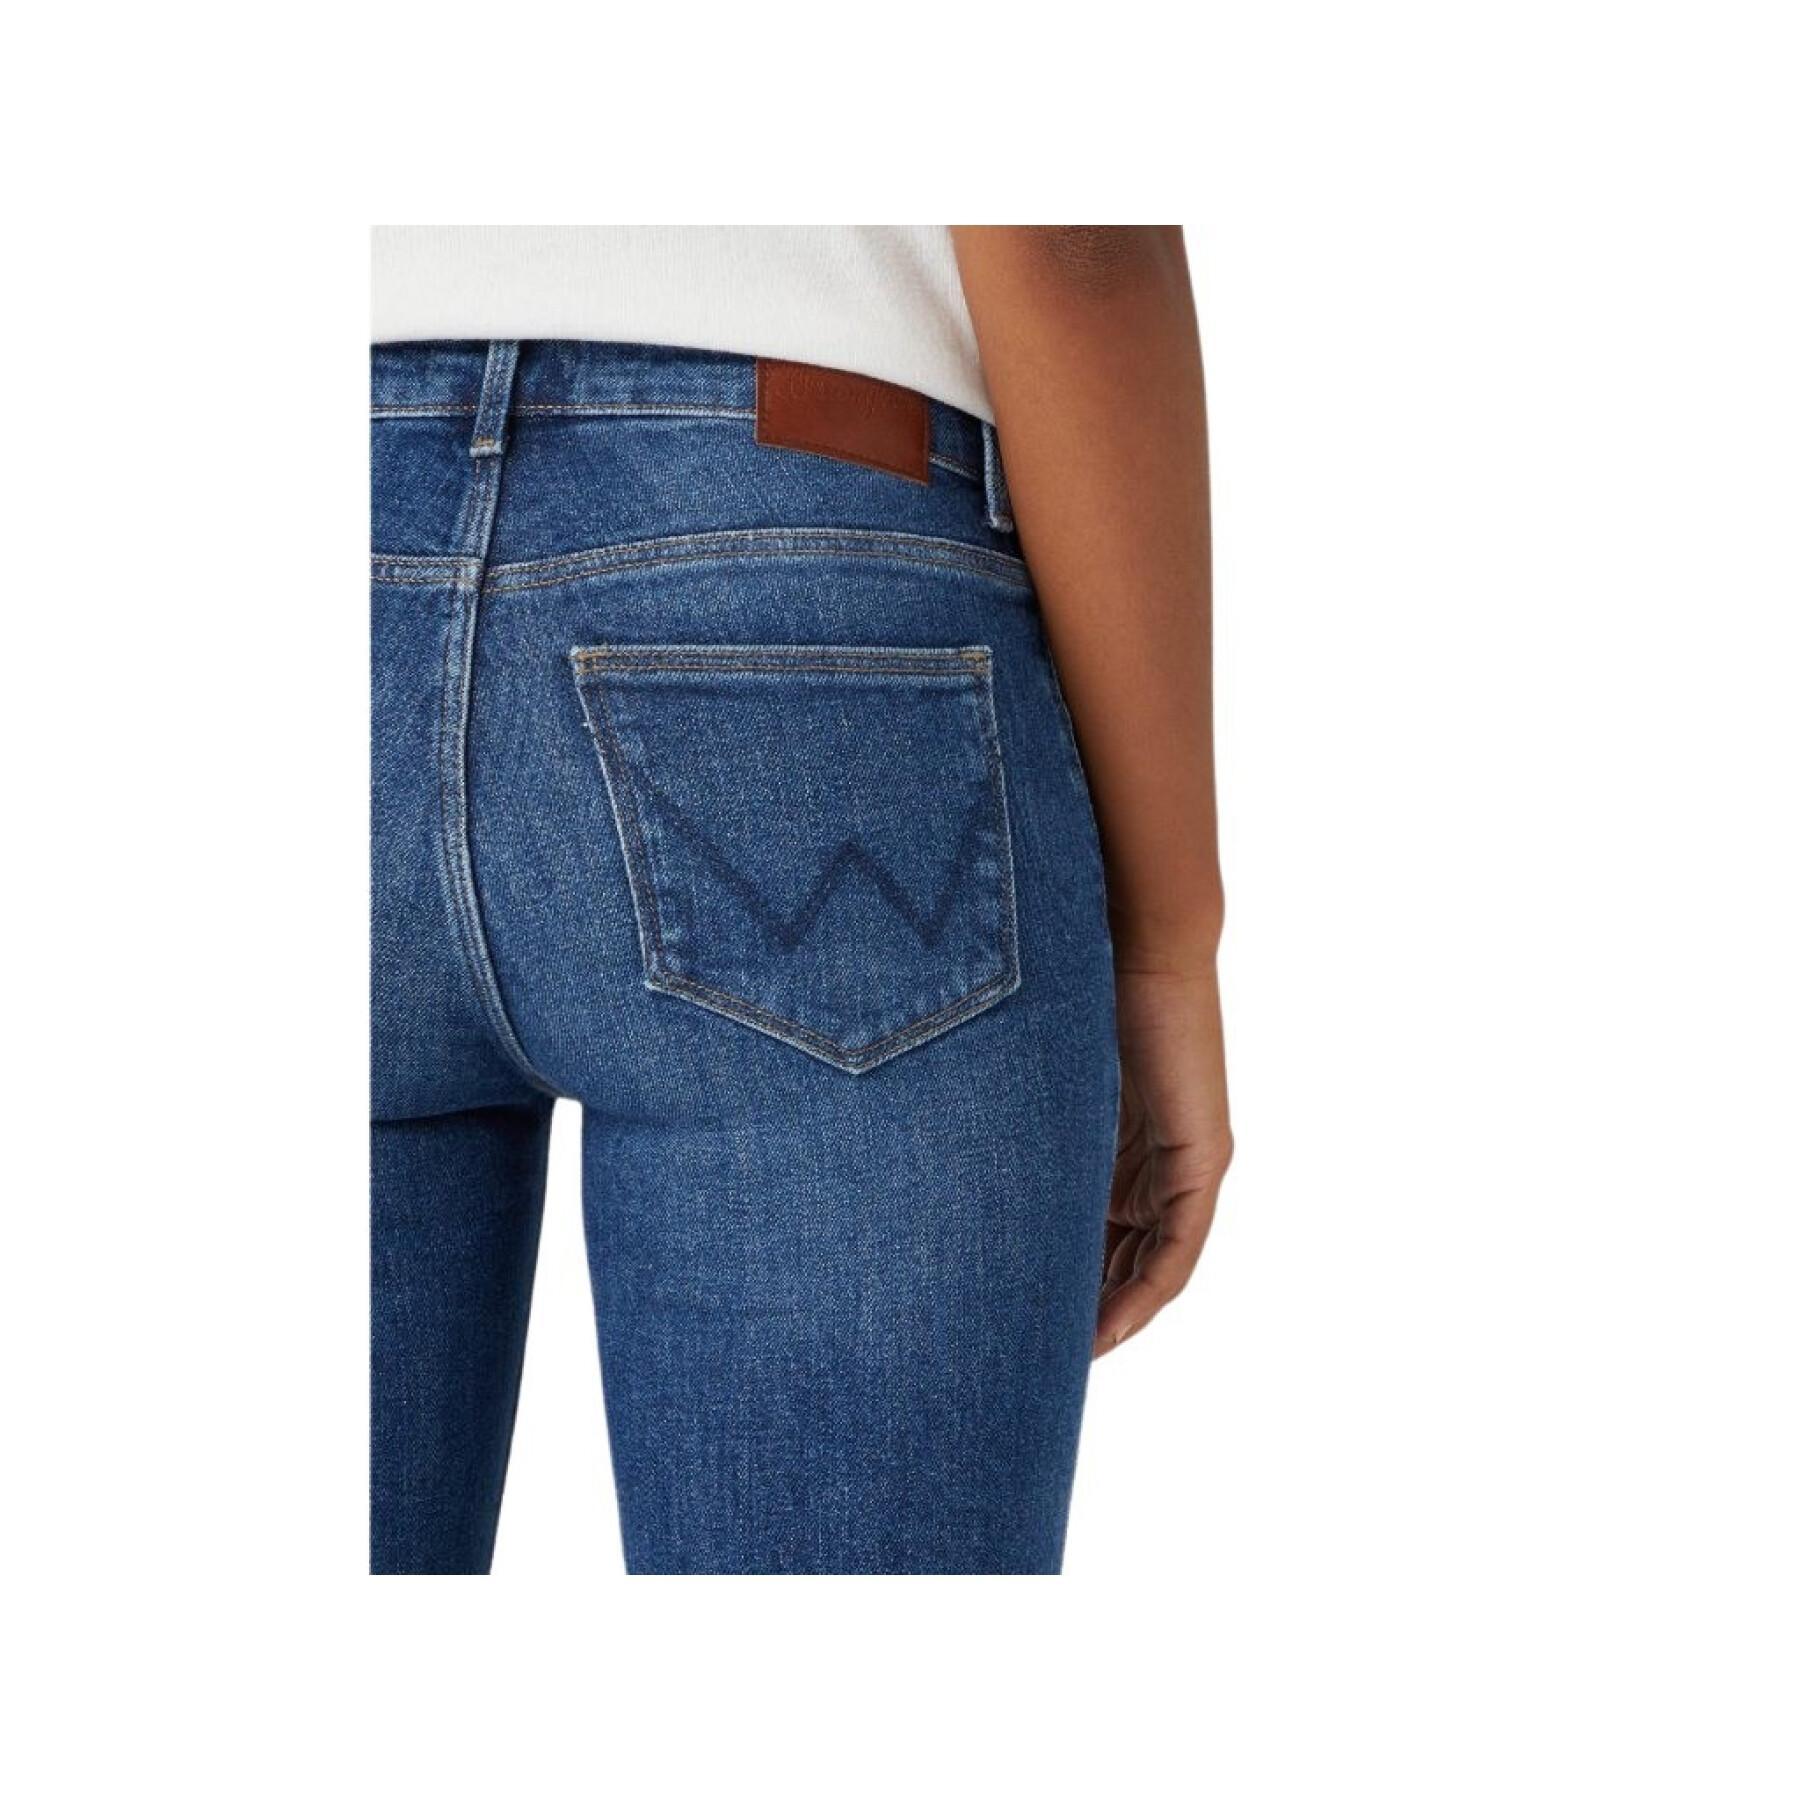 Women's straight jeans Wrangler in Airblue